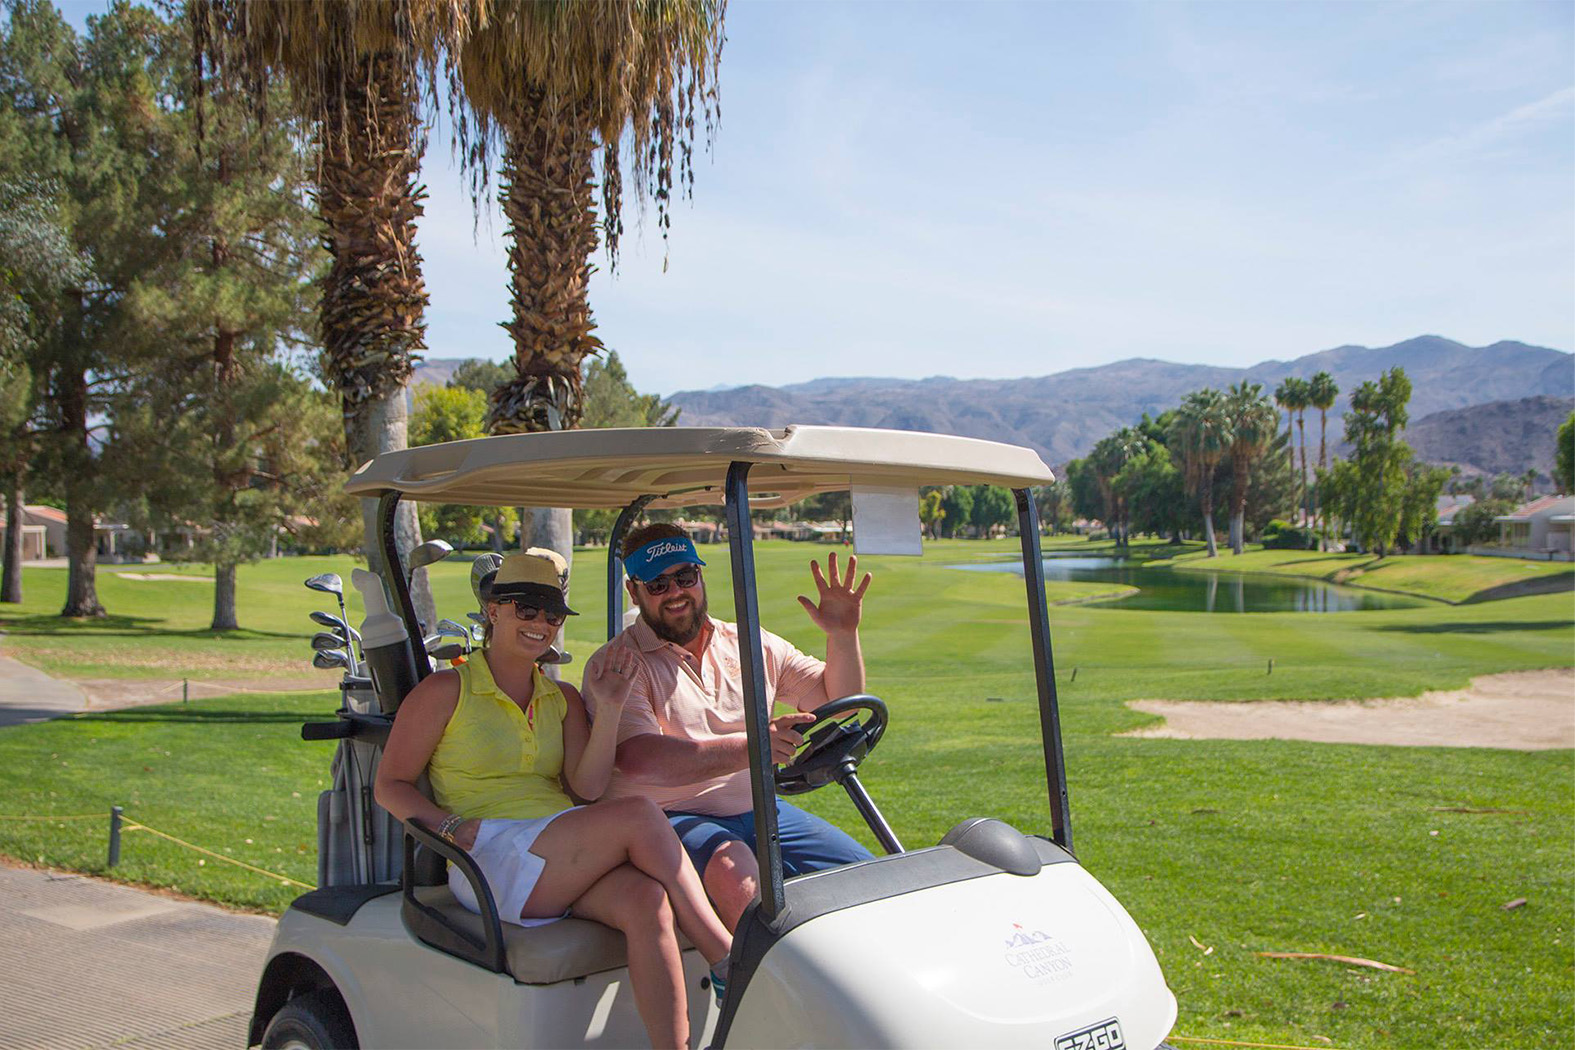 a smiling man and woman on a golf cart while waving 